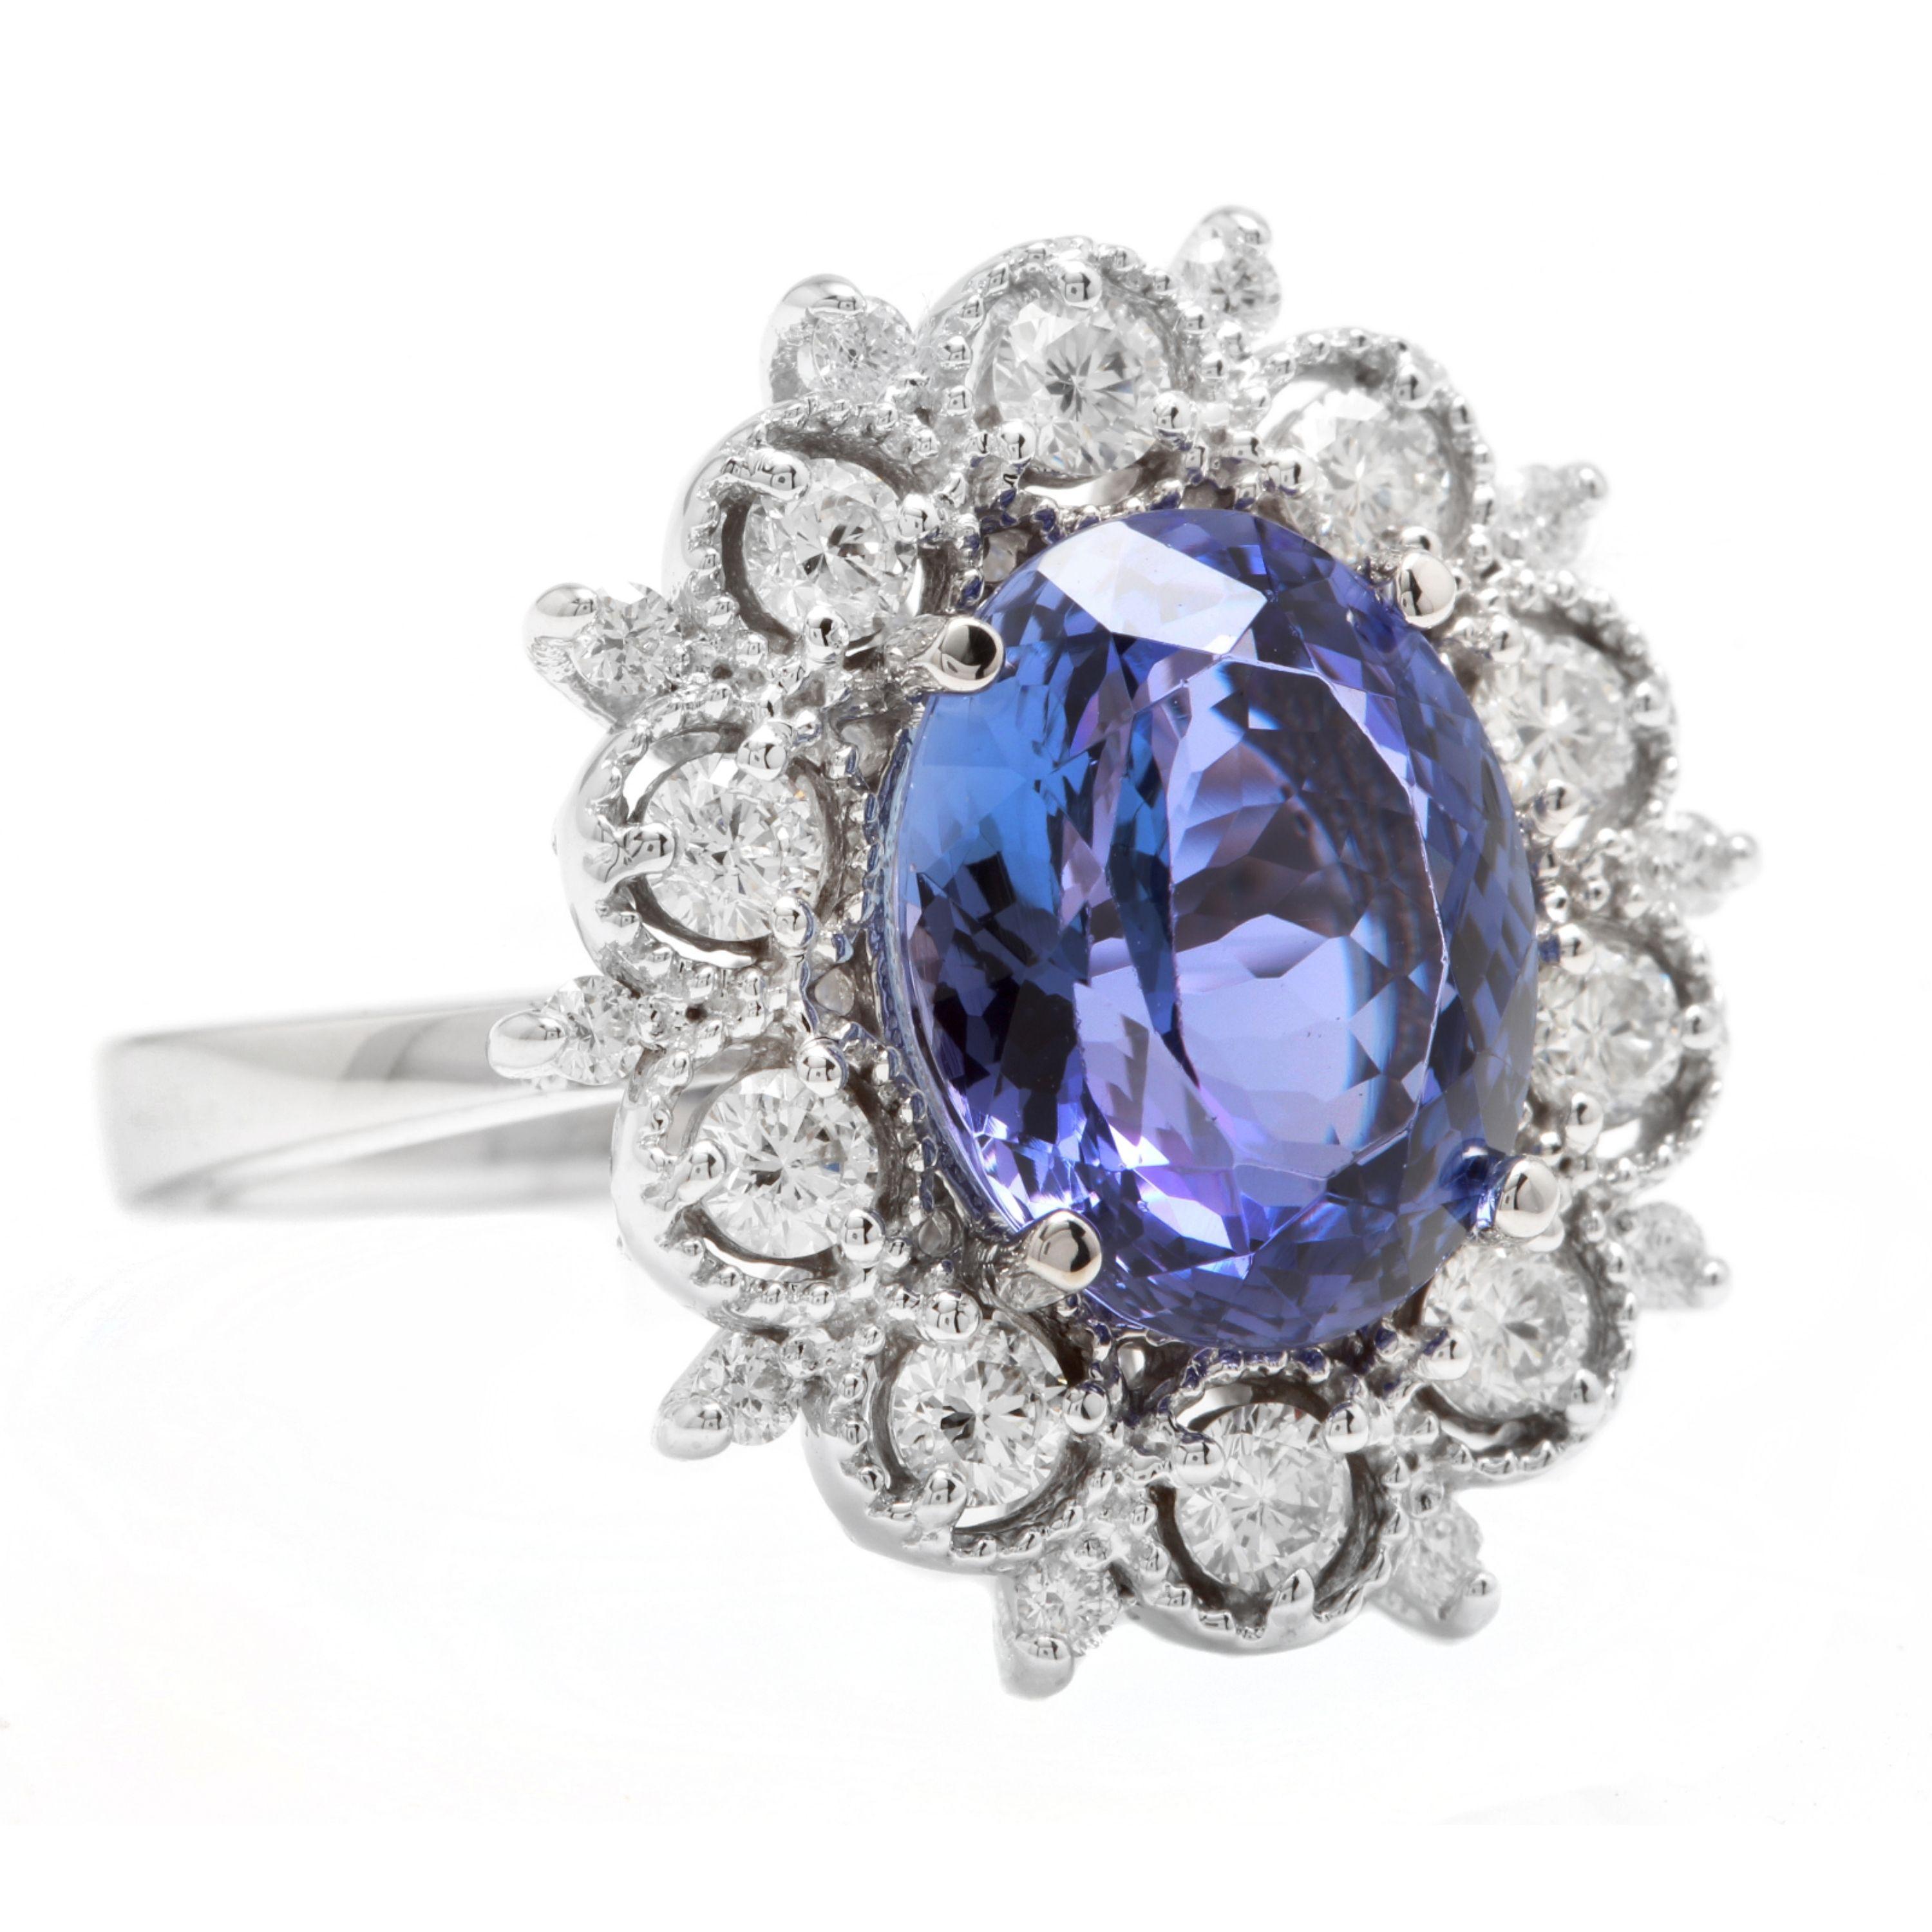 6.30 Carats Natural Very Nice Looking Tanzanite and Diamond 14K Solid White Gold Ring

Total Natural Oval Cut Tanzanite Weight is: Approx. 5.30 Carats

Tanzanite Measures: 12.00 x 10.00

Natural Round Diamonds Weight: Approx. 1.00 Carats (color G-H